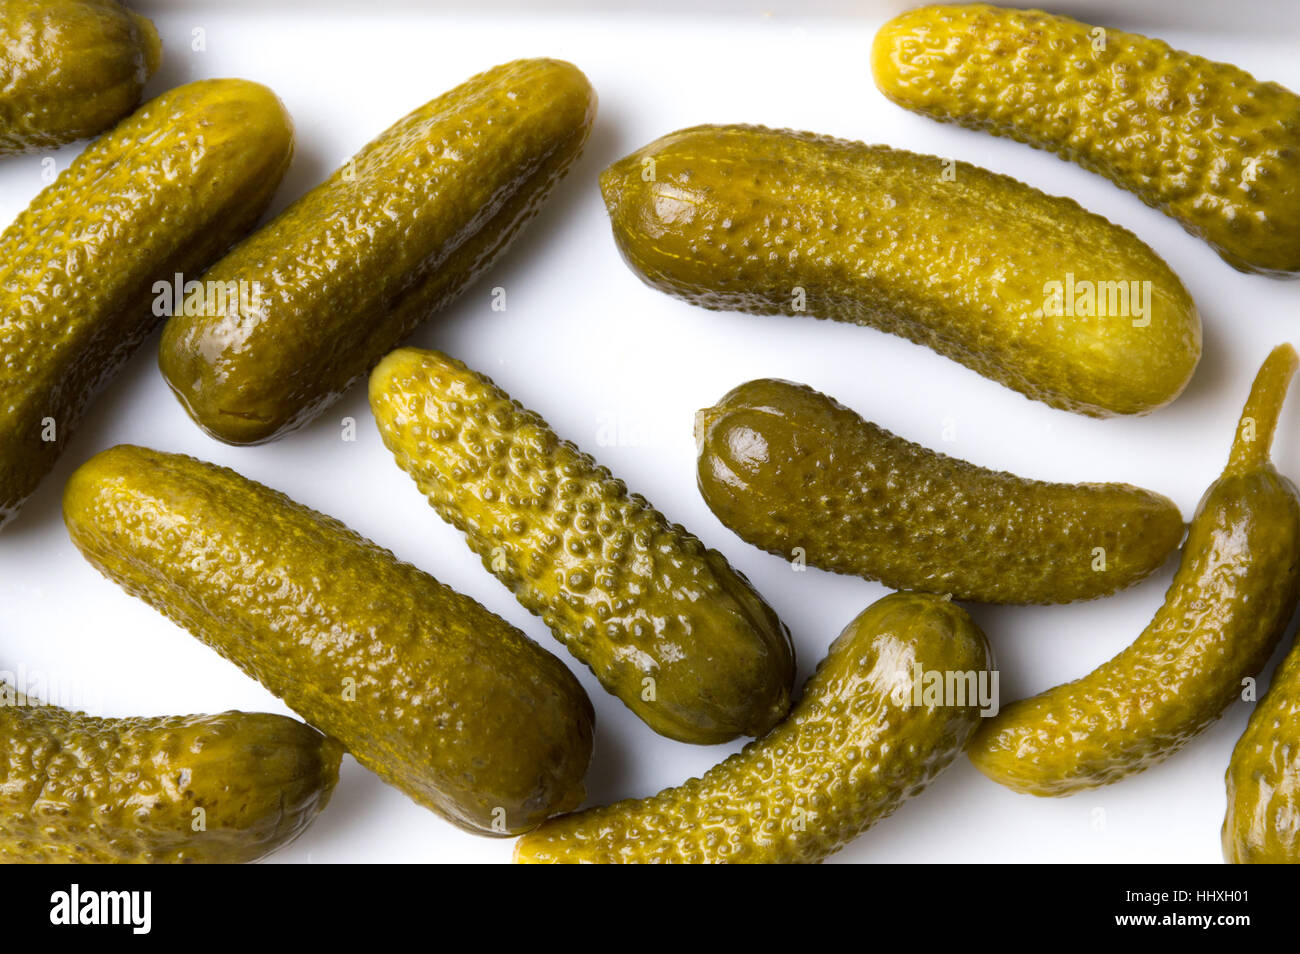 Bunch of pickled cucumbers on white background Stock Photo